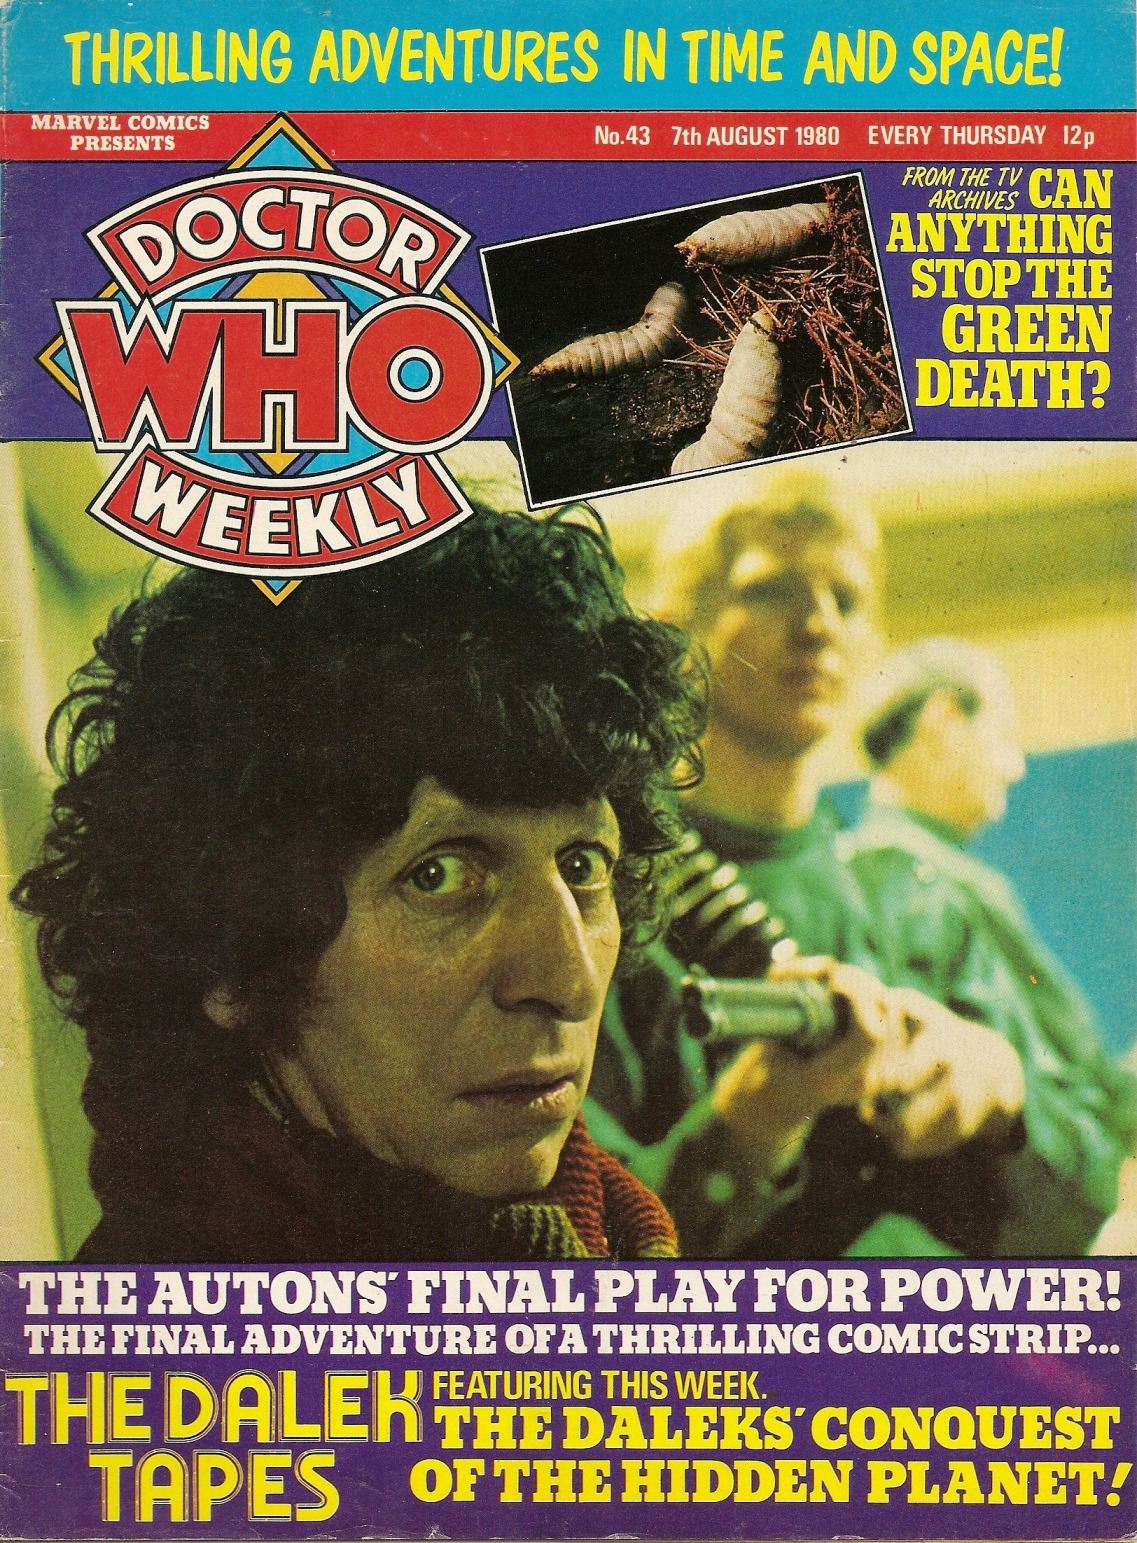 Doctor Who Weekly - Issue 43 - 7th August 1980